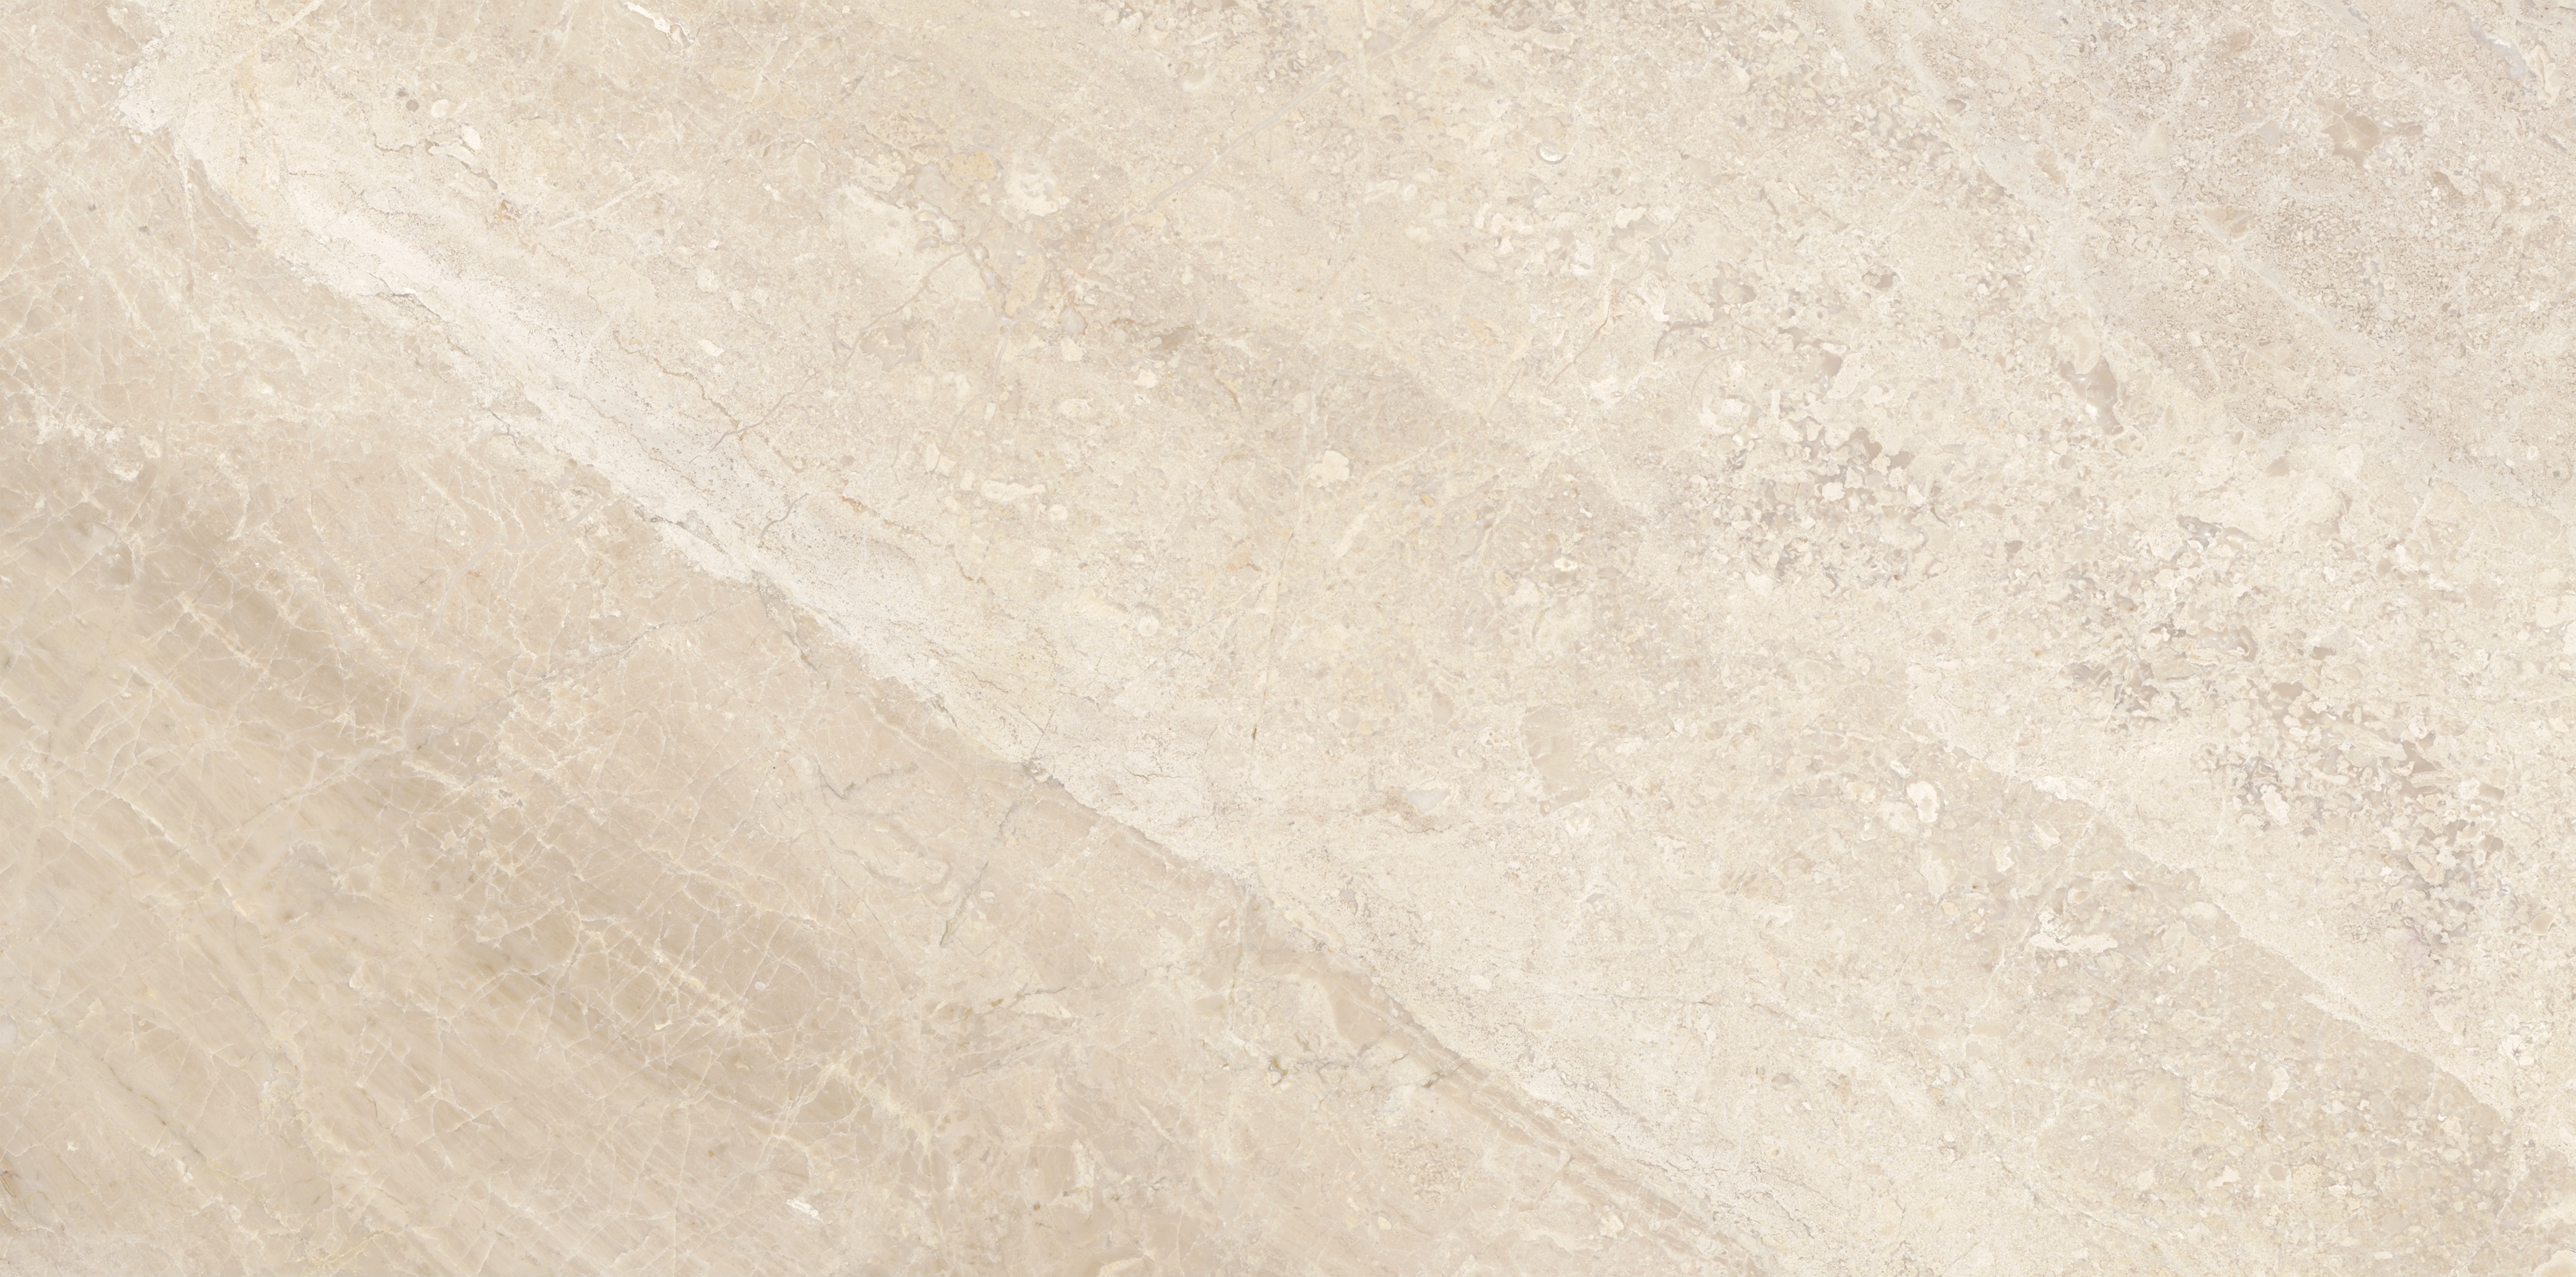 marble pattern natural stone field tile from impero reale anatolia collection distributed by surface group international honed finish straight edge edge 18x36 rectangle shape